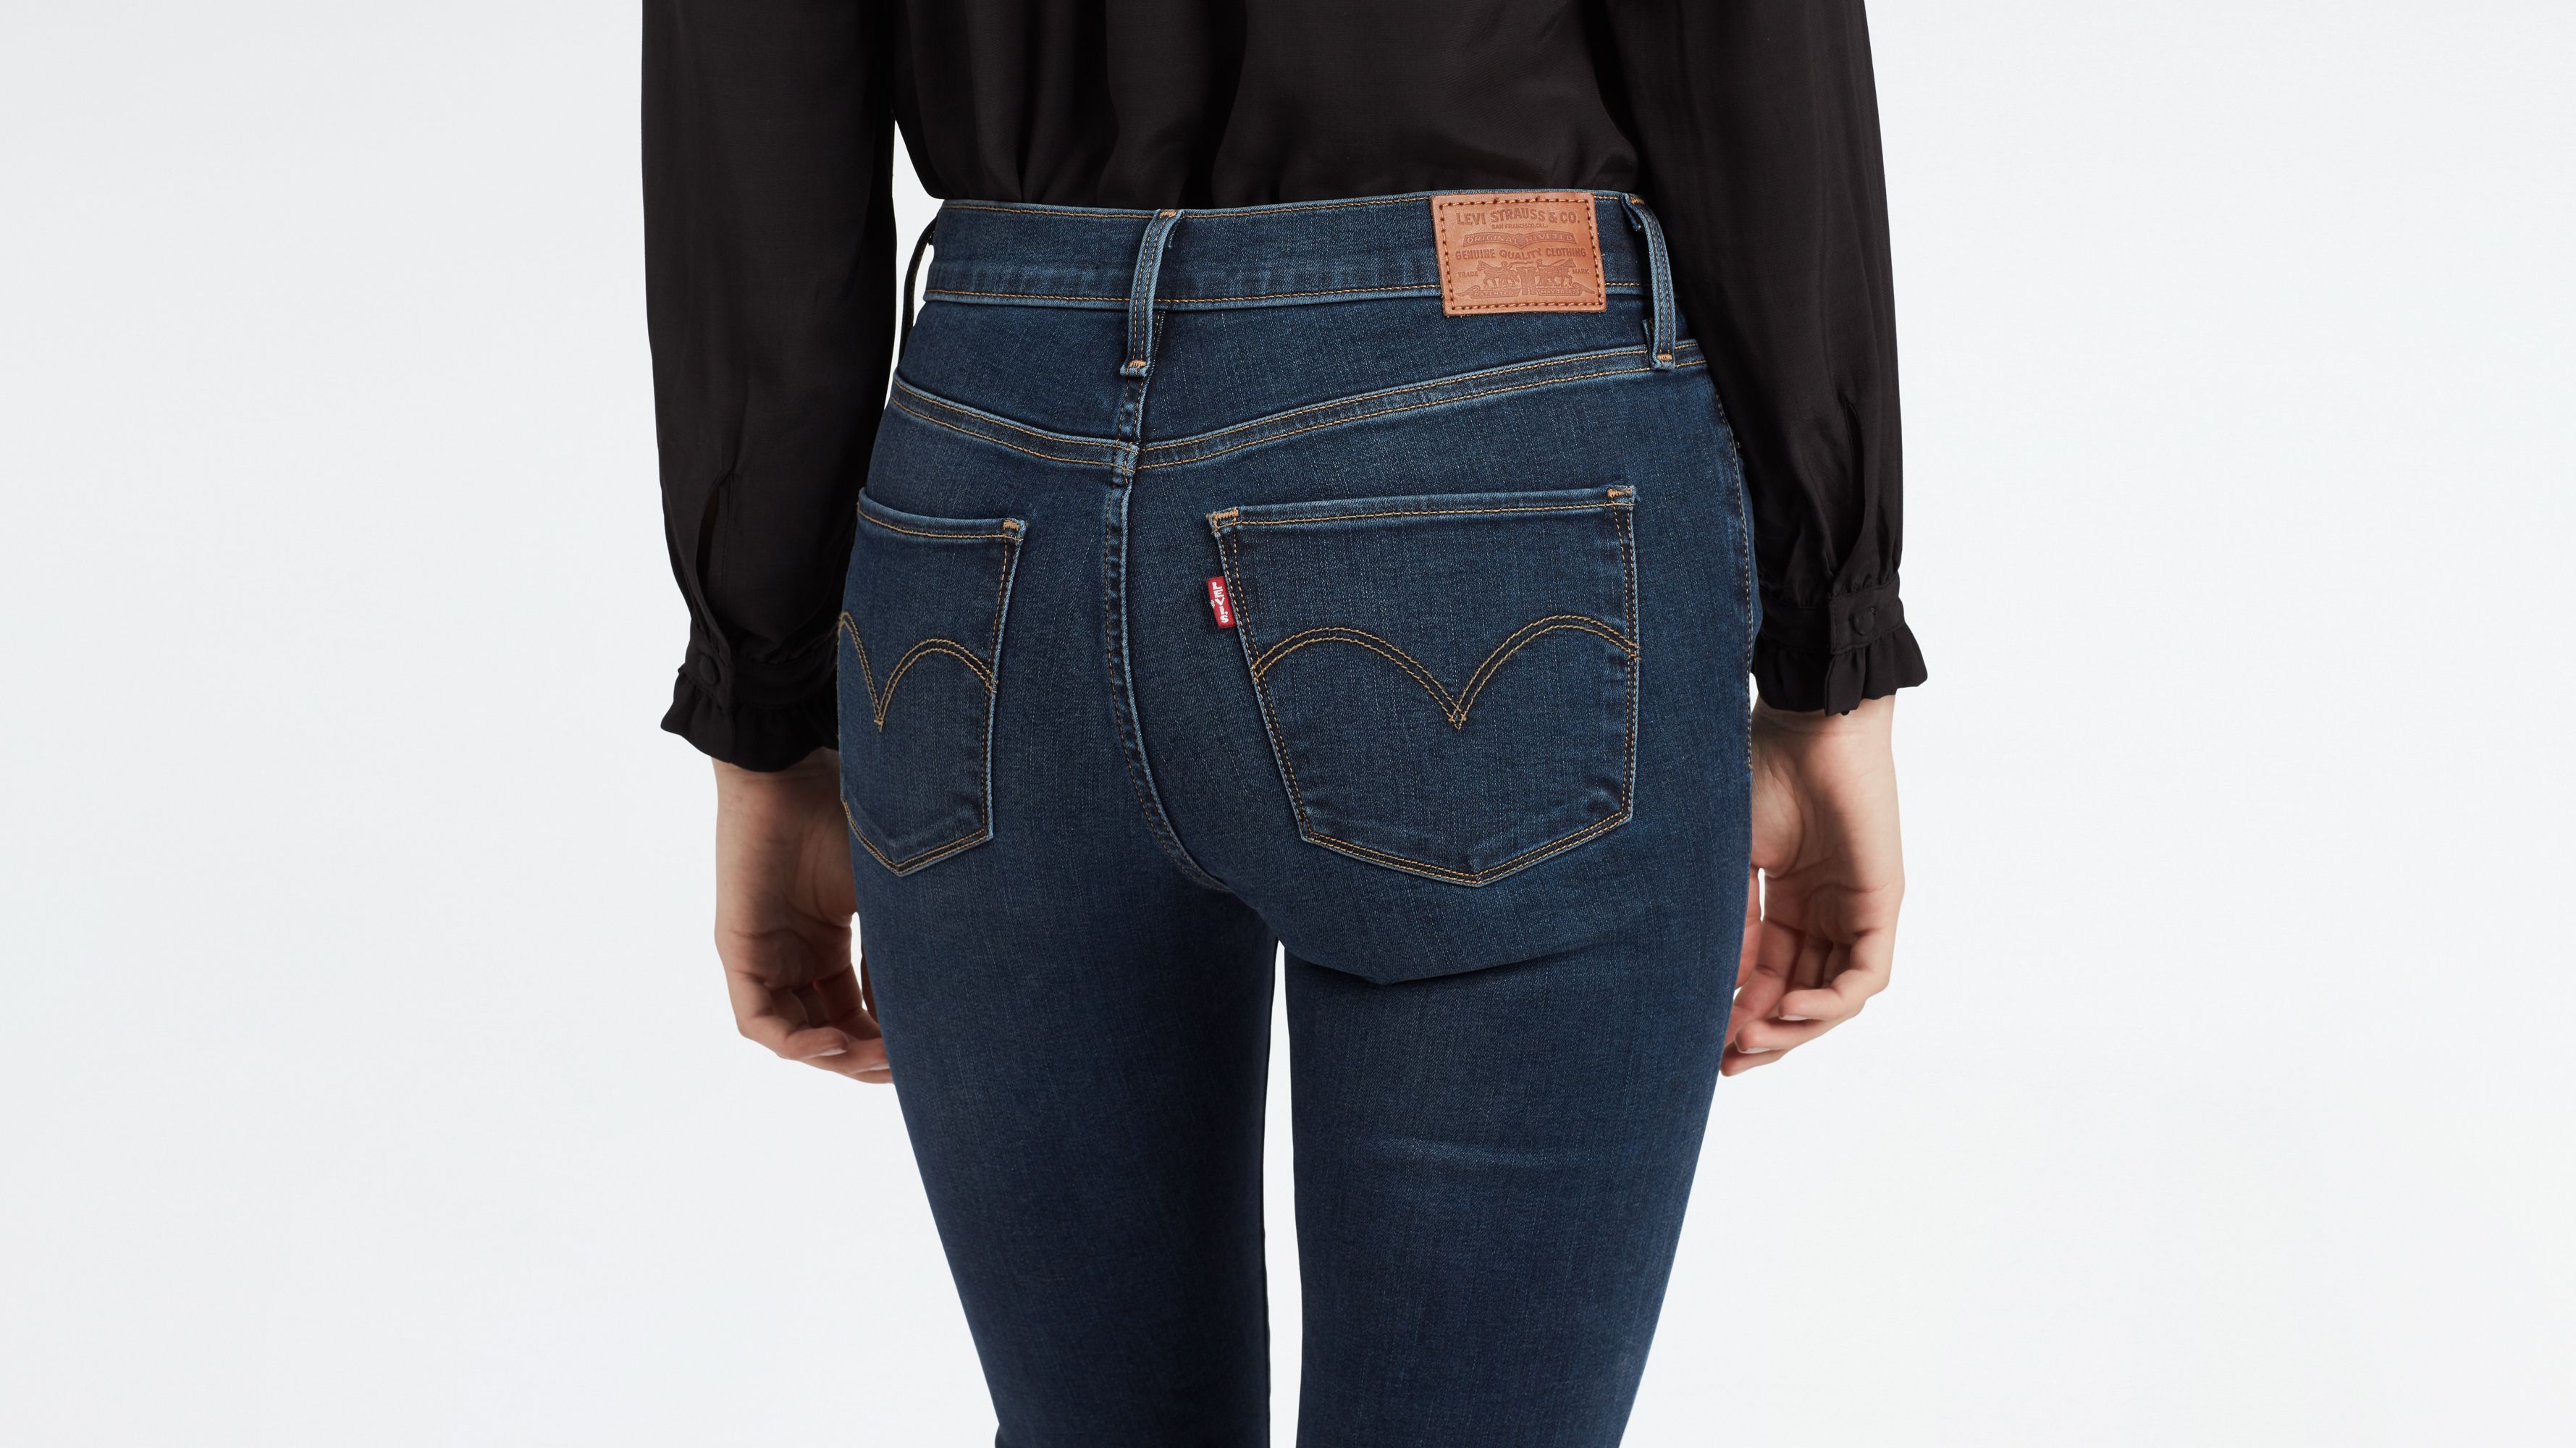 levi's shaping super skinny jeans